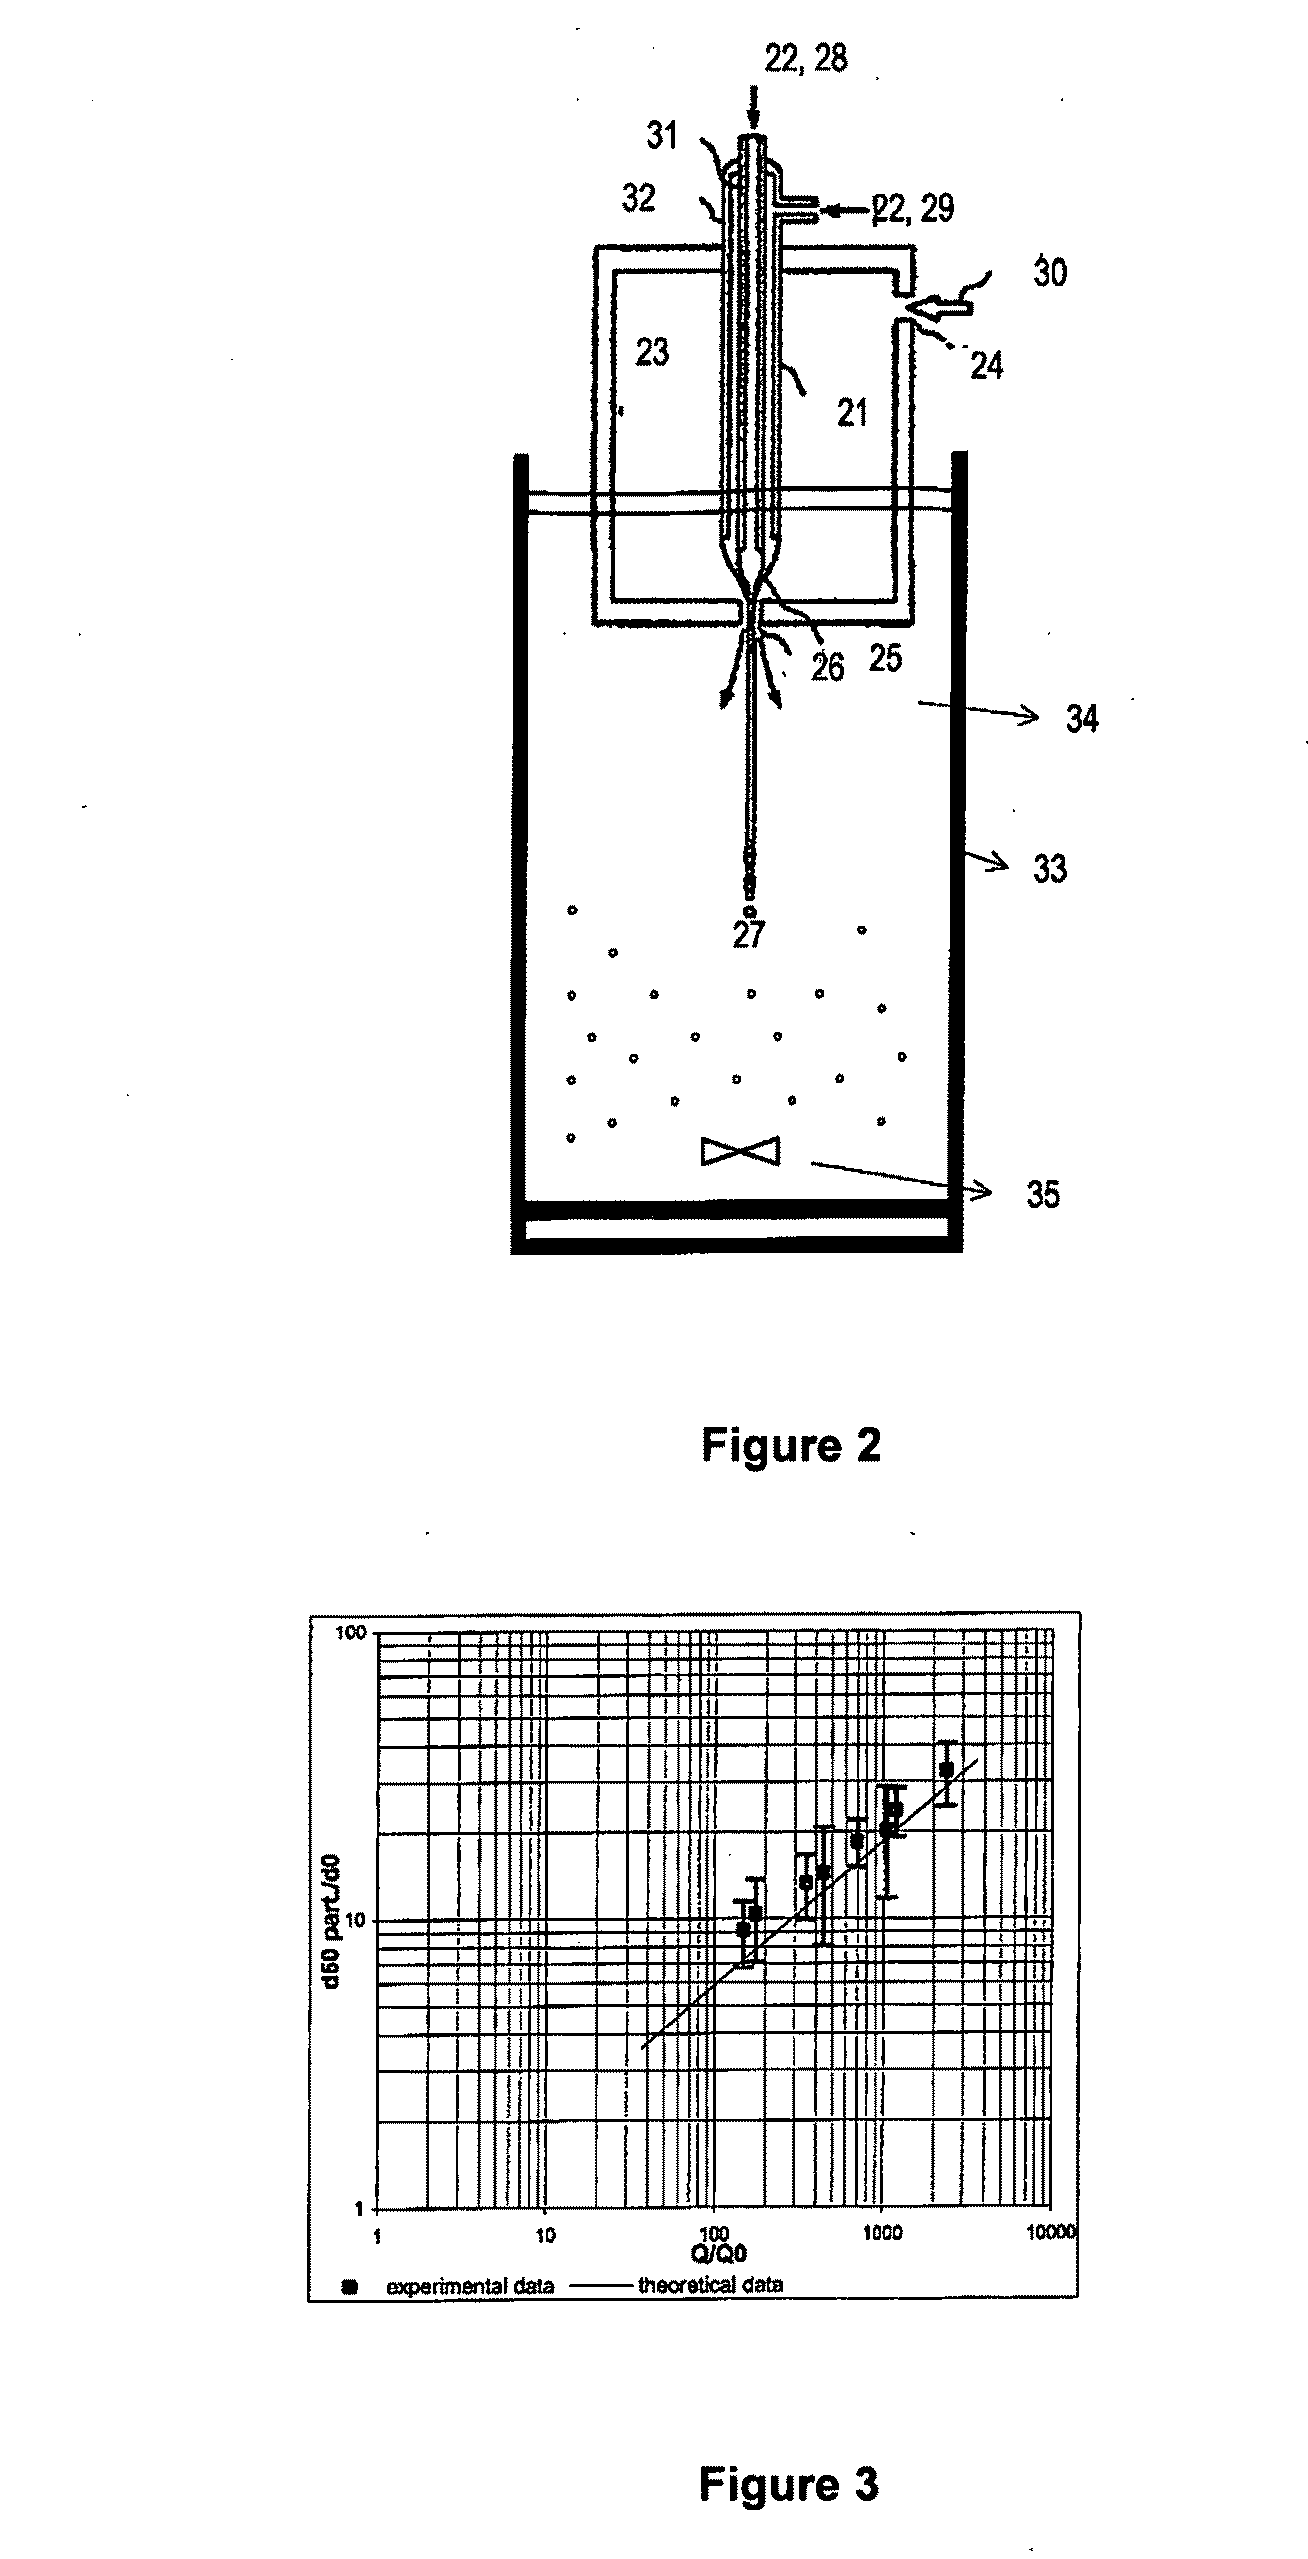 Method and Device for Obtaining Micro and Nanometric Size Particles